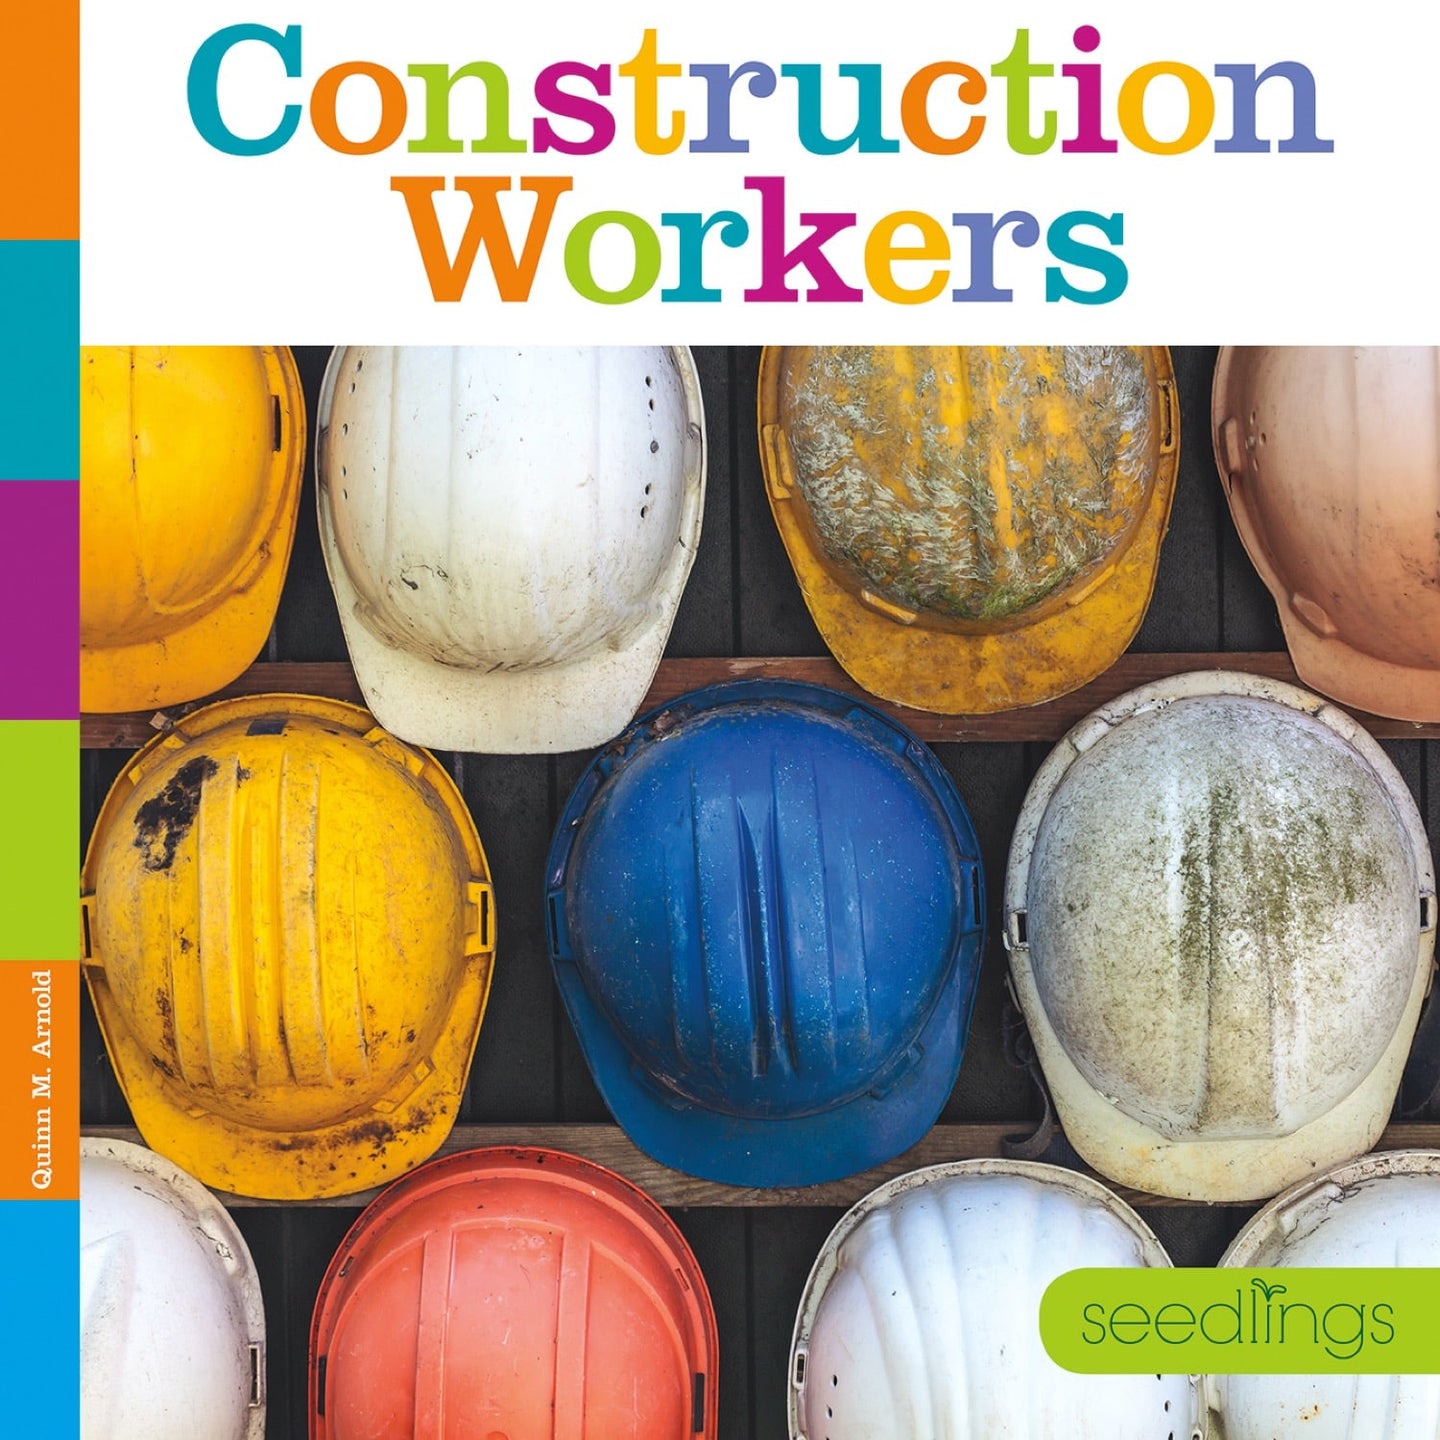 Seedlings: Construction Workers